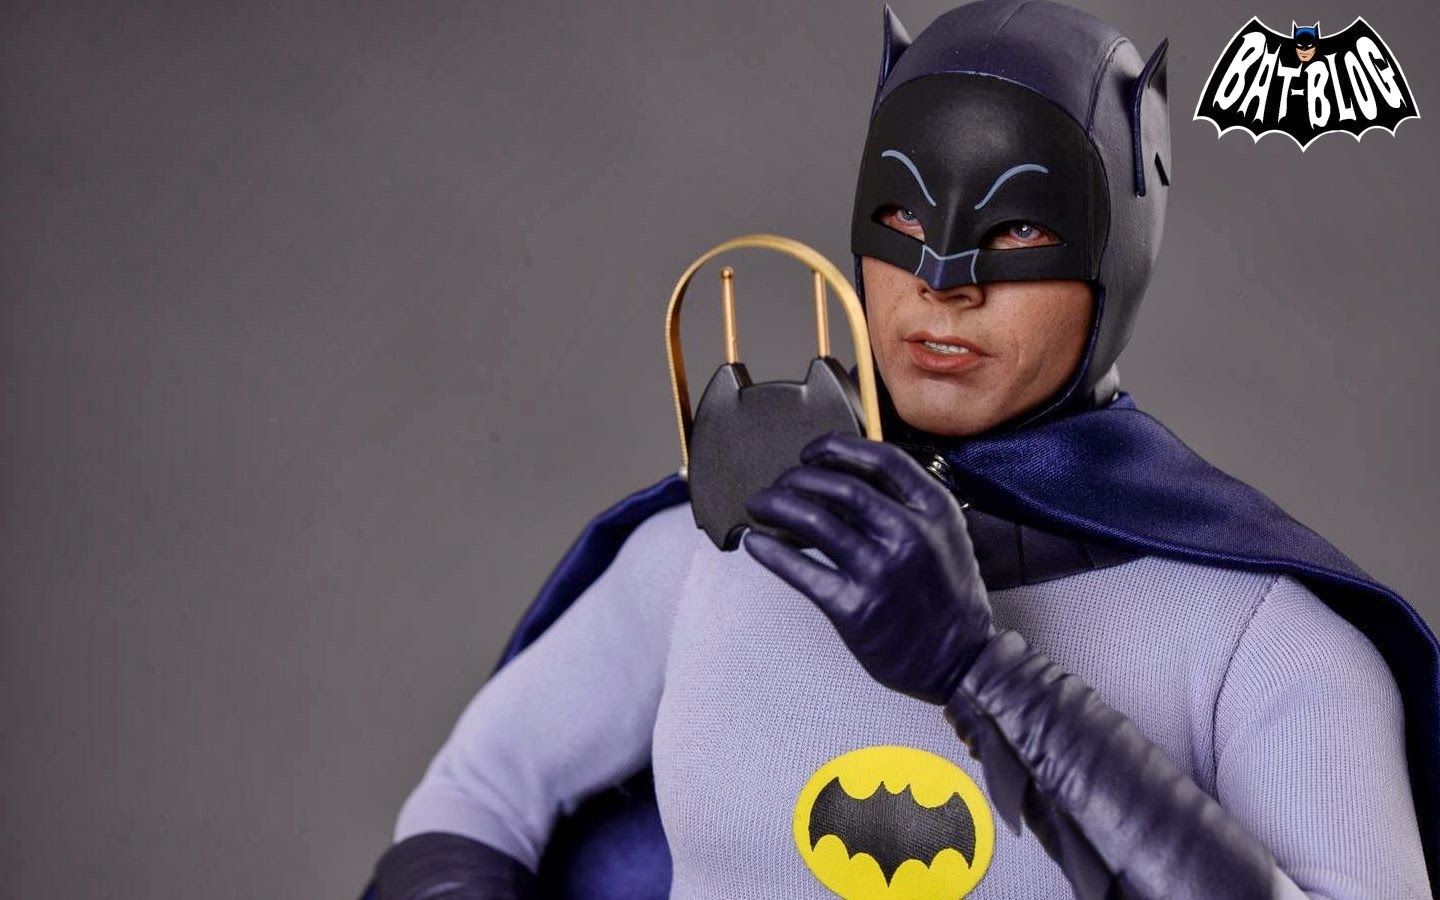 BAT, BATMAN TOYS and COLLECTIBLES: BATMAN WALLPAPERS Based on the HOT TOYS 1966 Adam West Figure. Batman wallpaper, Batman, Batman toys